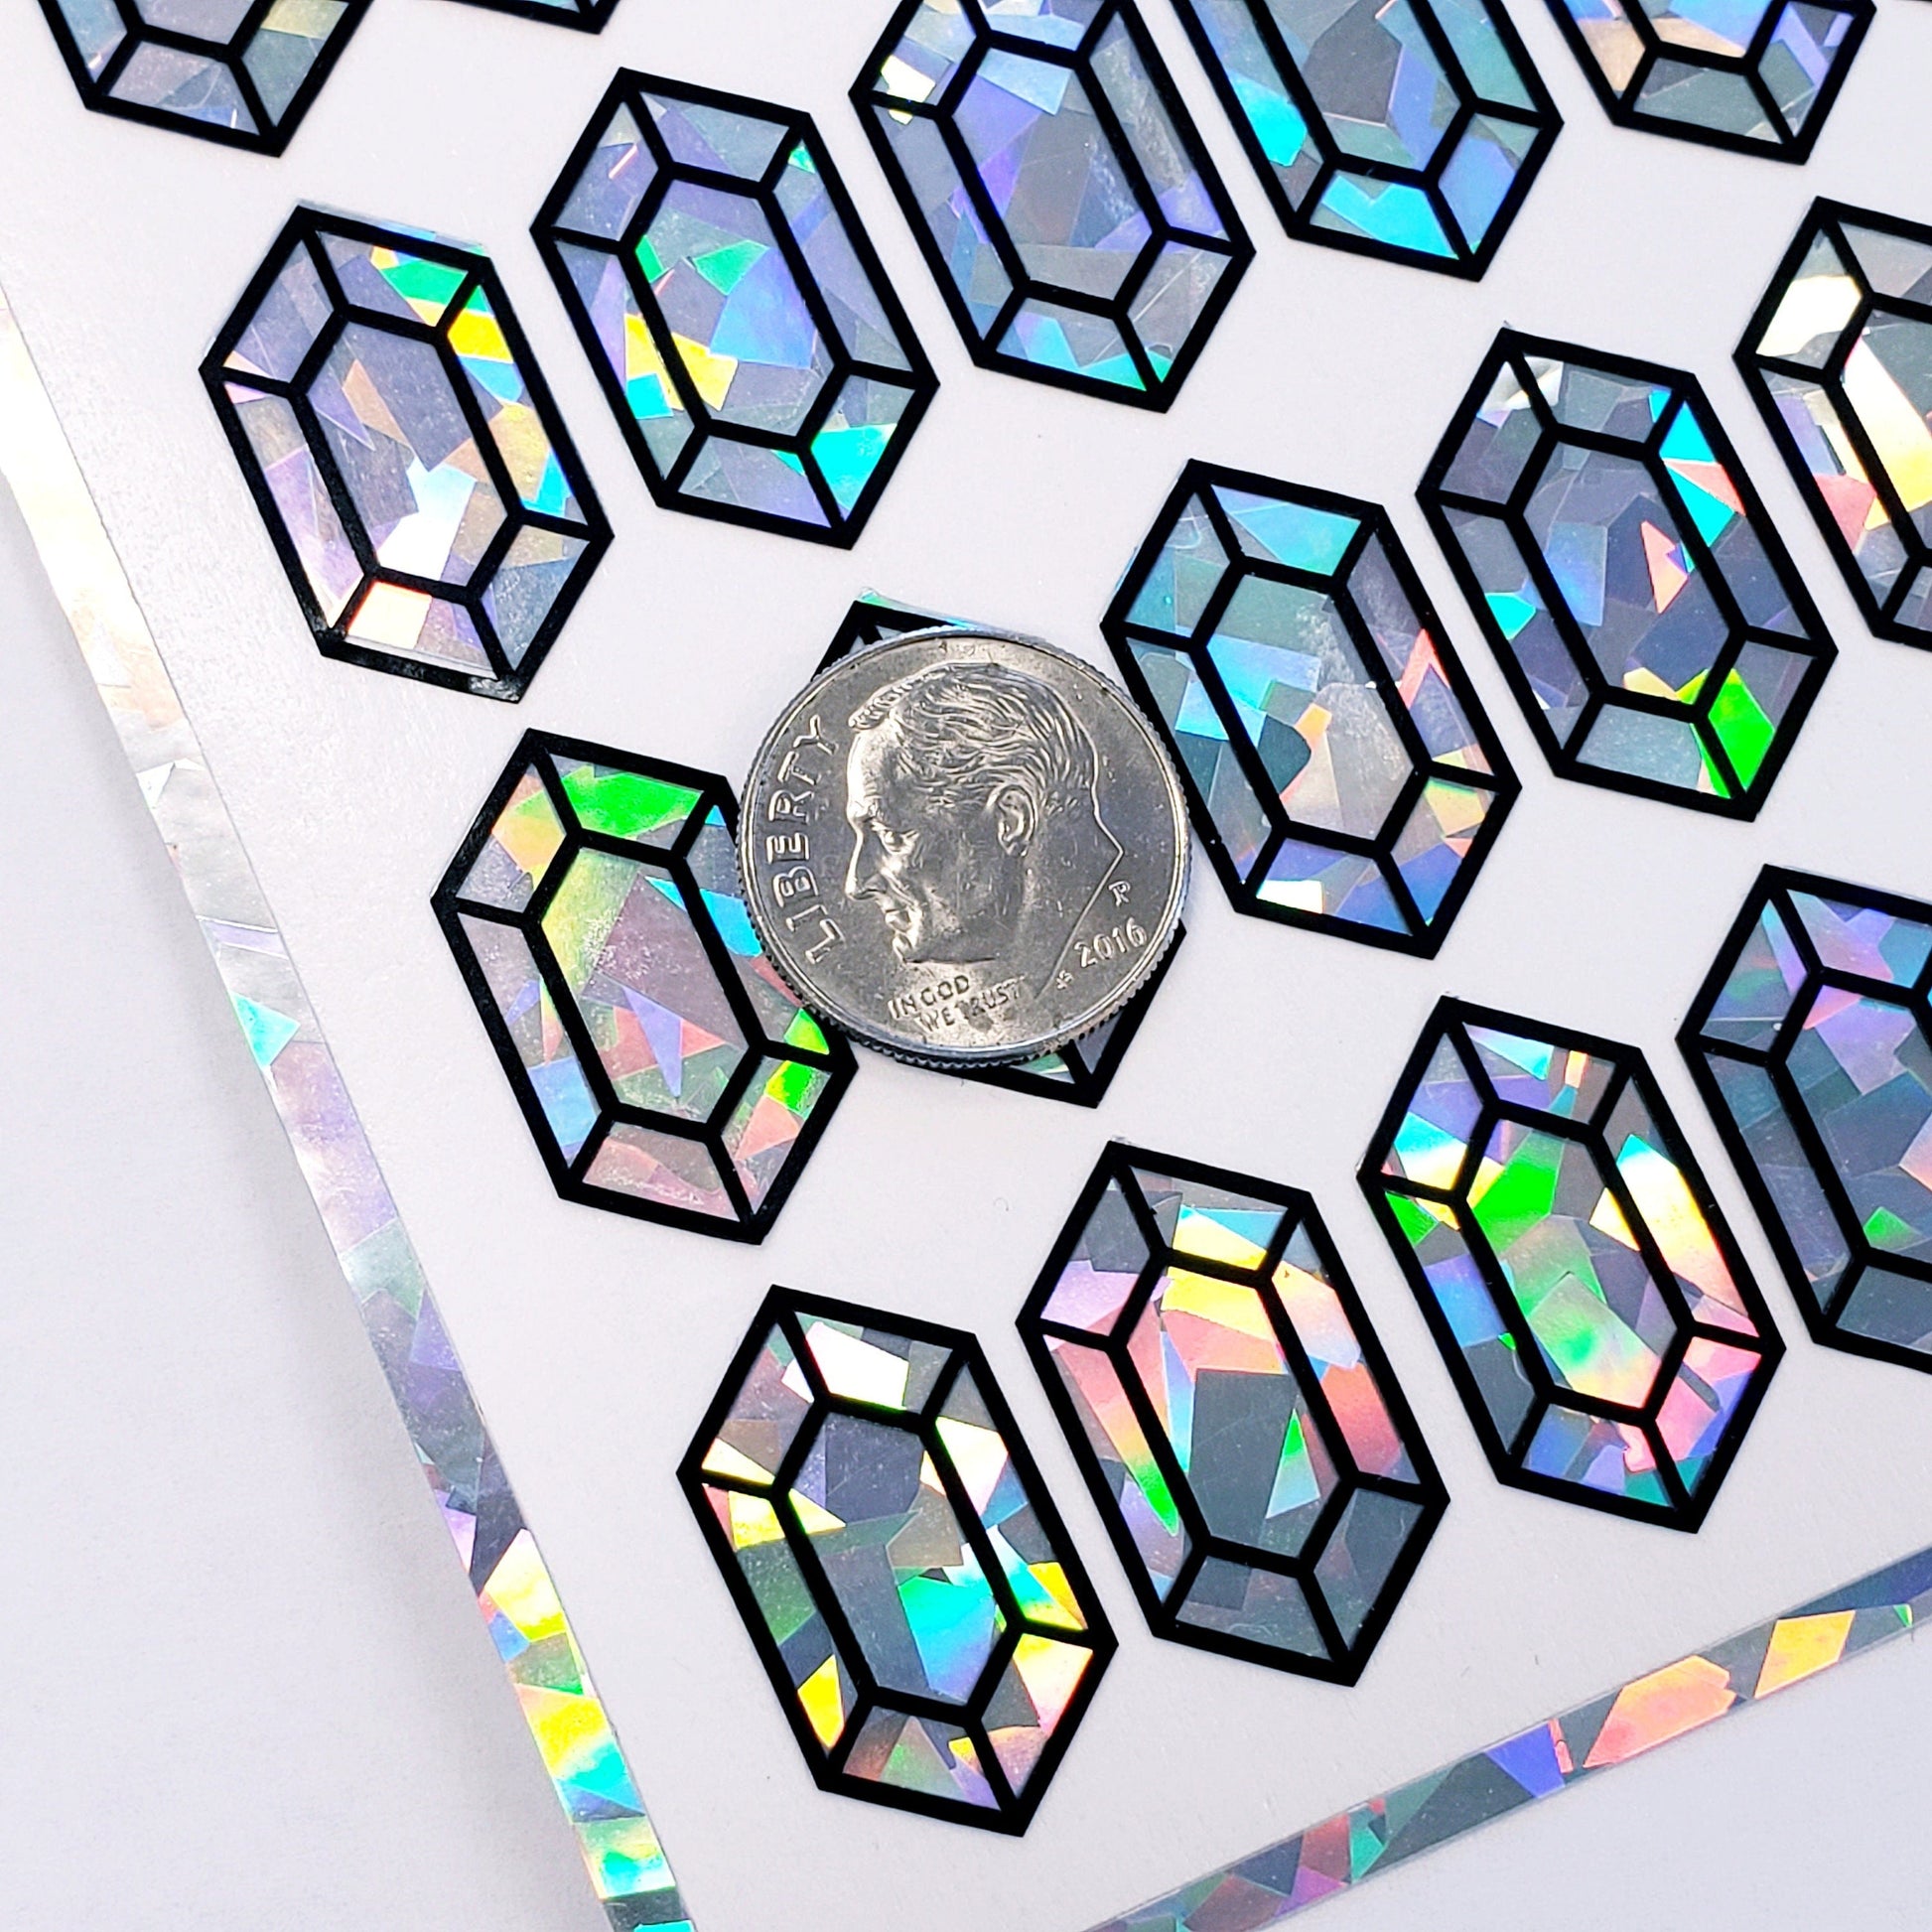 Diamond gemstone stickers, set of 36 small sparkly rupee shaped decals for laptops, notebooks, journals, Treasure stickers for gamers.